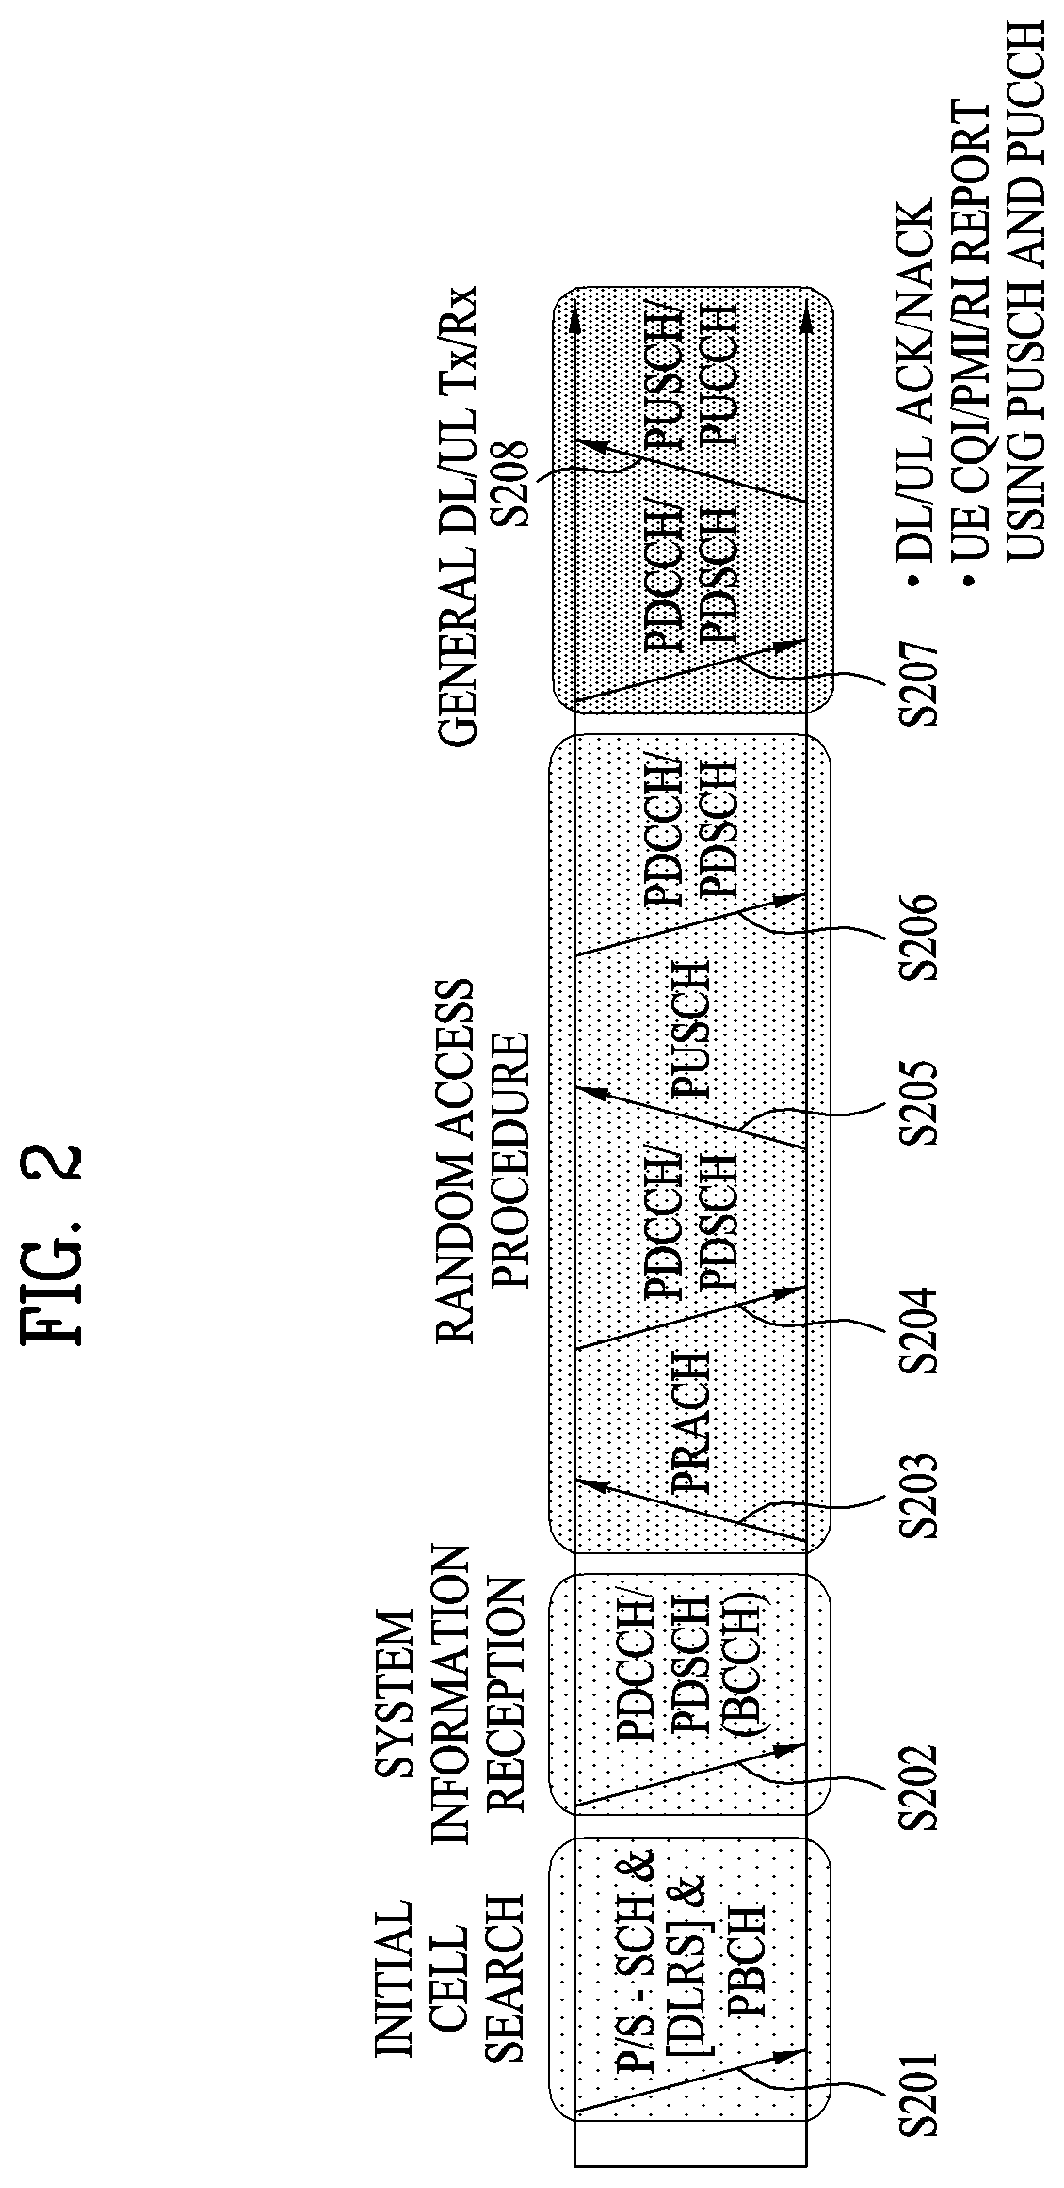 Ar mobility and method of controlling ar mobility